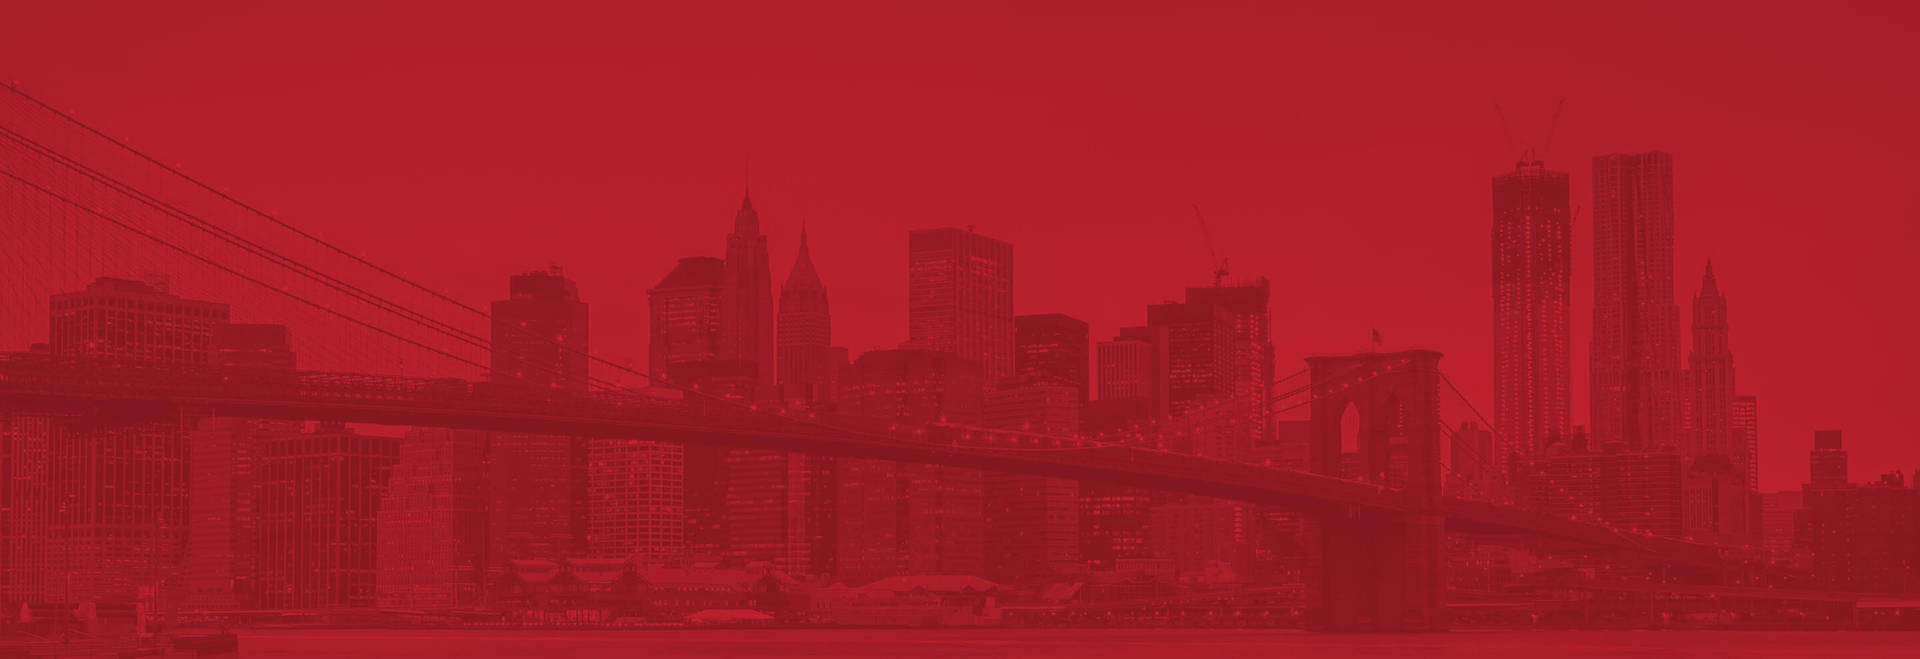 City Background In Red Overlay Wallpaper